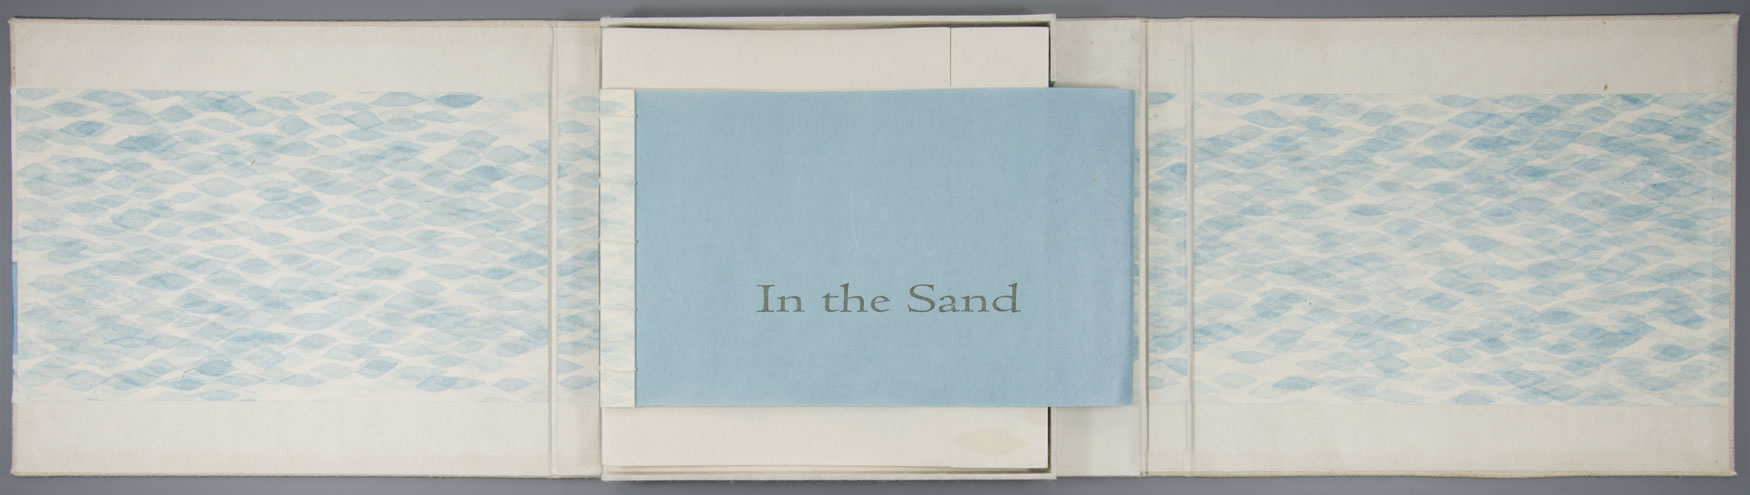 In the Sand: Book of Permanence and Change